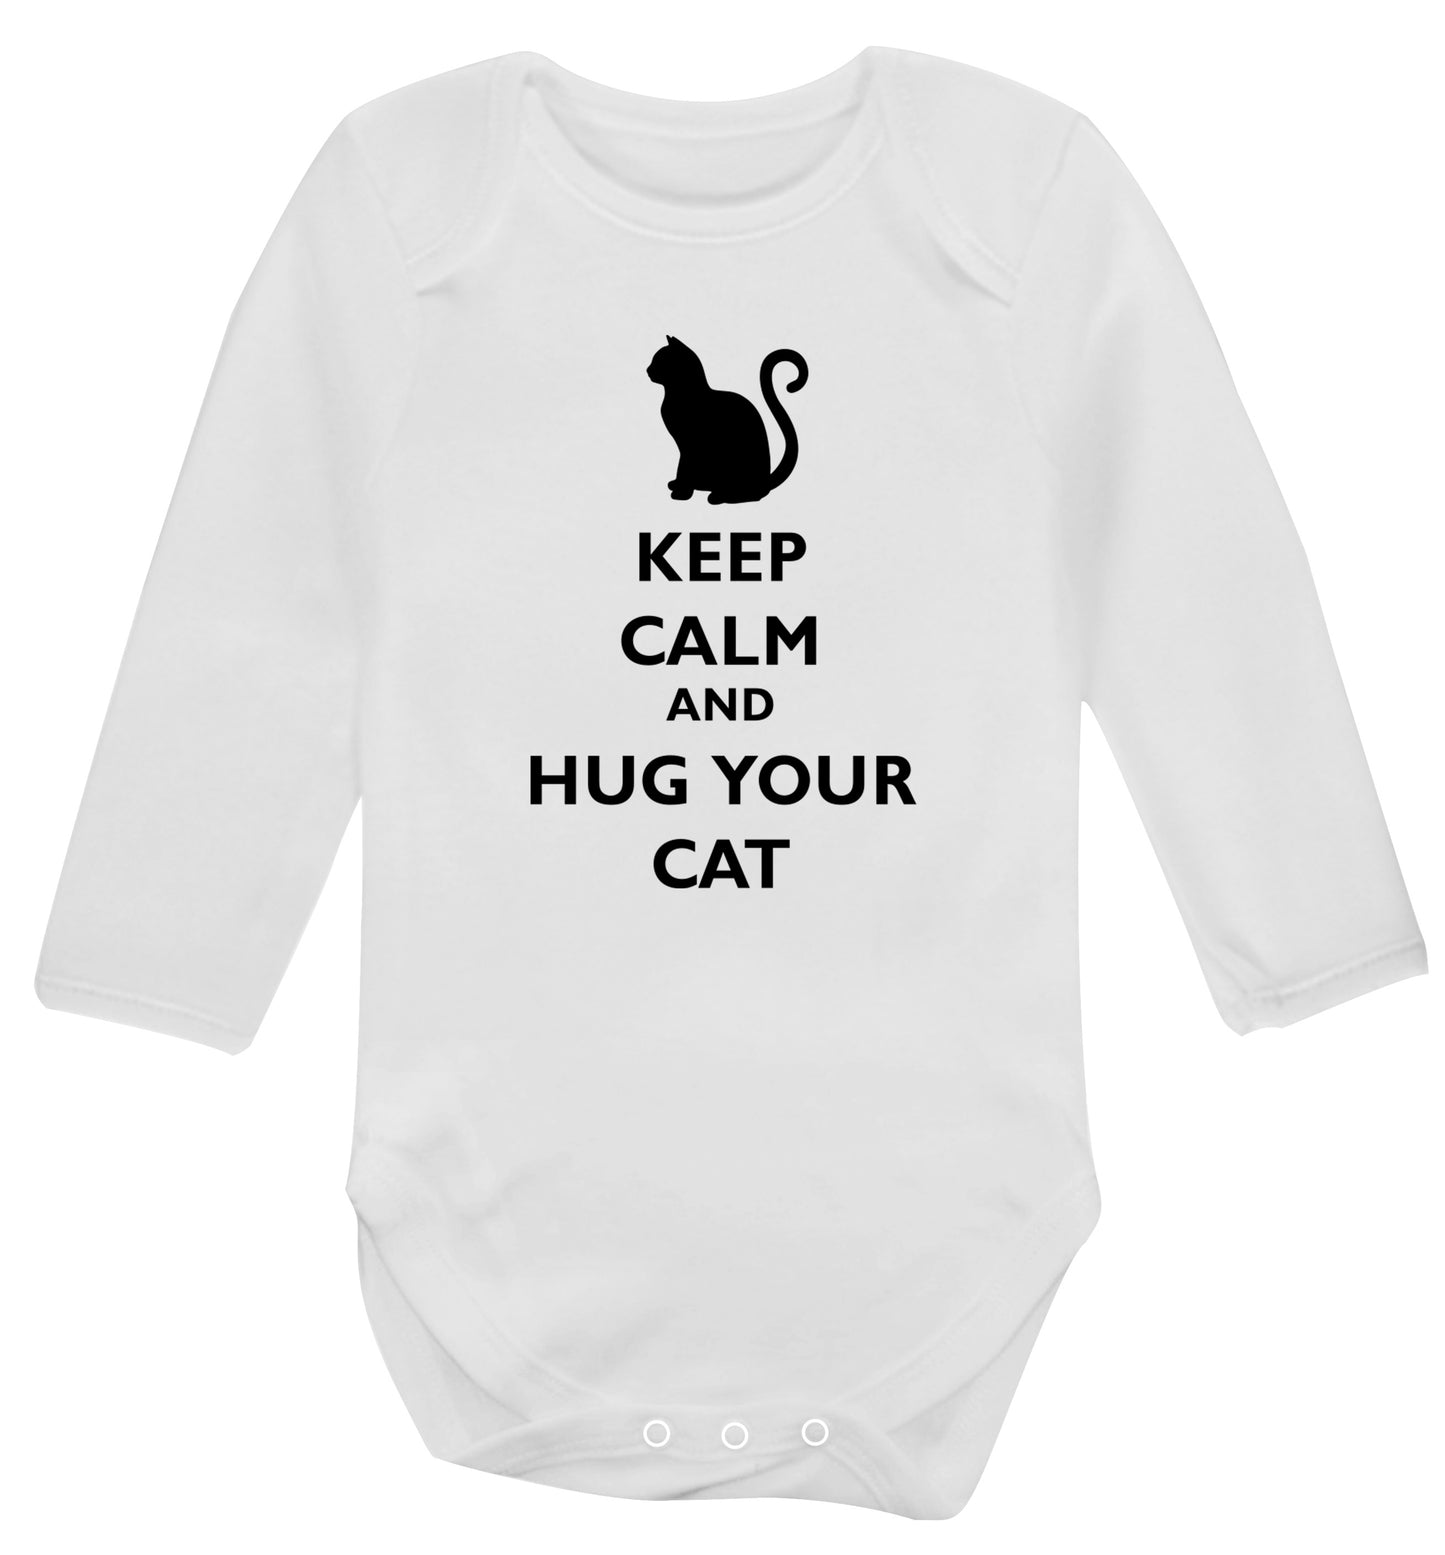 Keep calm and hug your cat Baby Vest long sleeved white 6-12 months